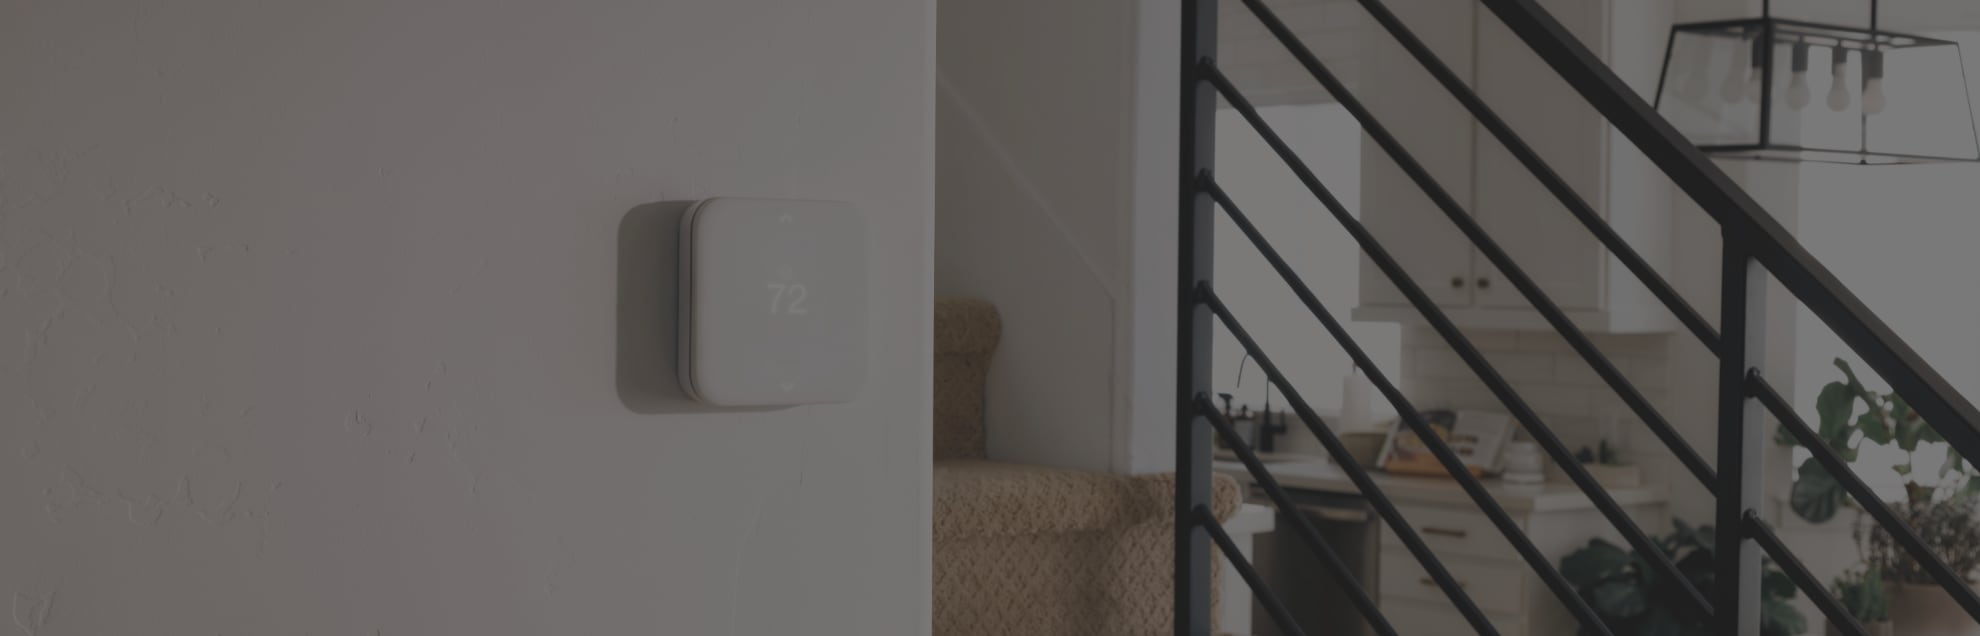 Fort Lauderdale Smart Thermostat